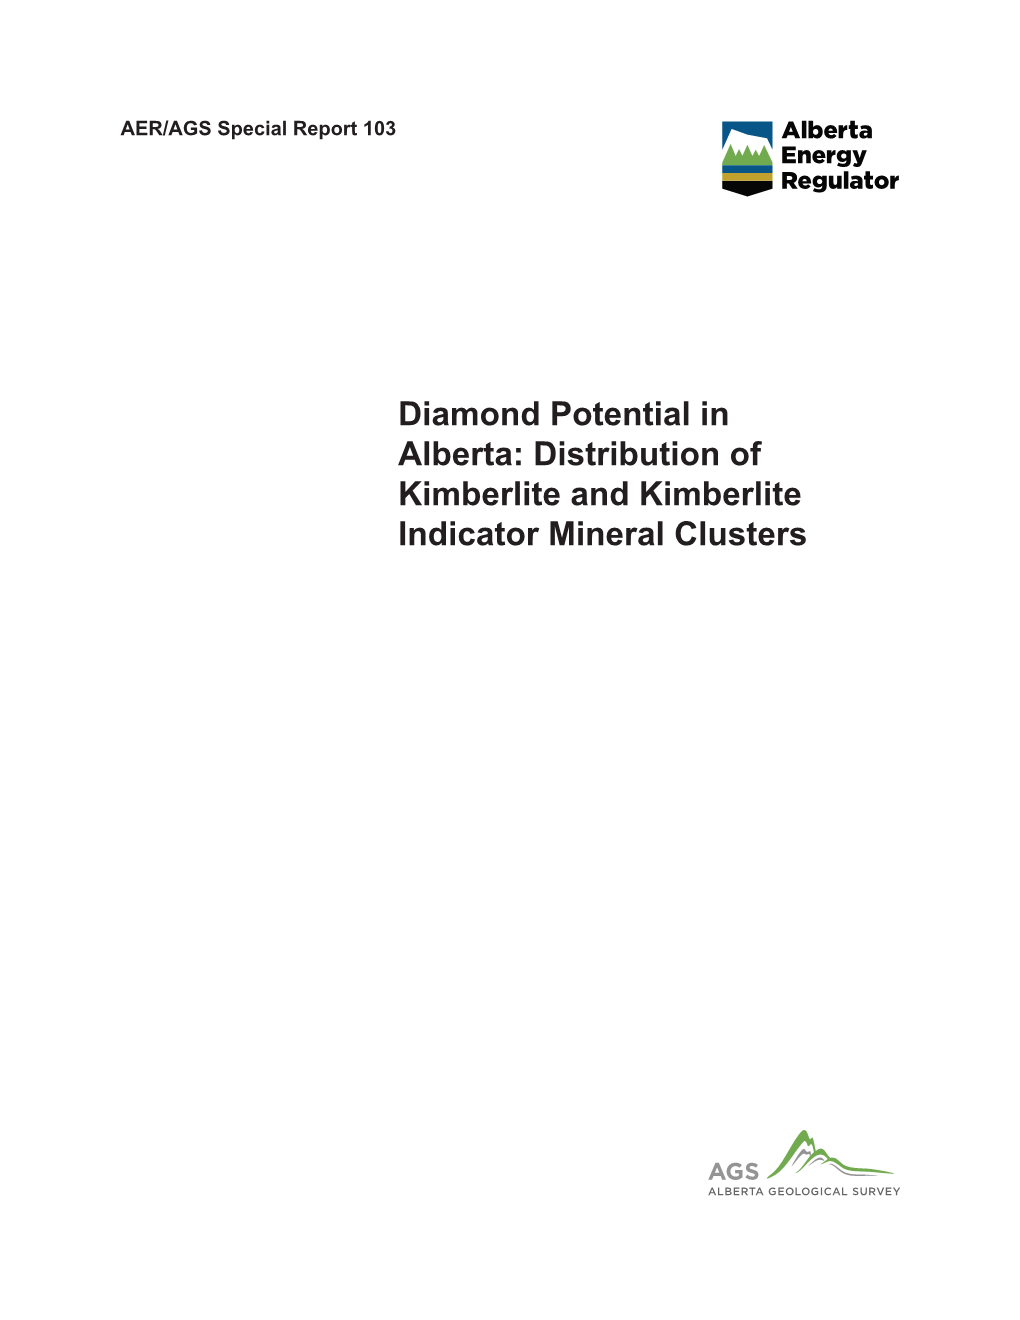 Diamond Potential in Alberta: Distribution of Kimberlite and Kimberlite Indicator Mineral Clusters AER/AGS Special Report 103